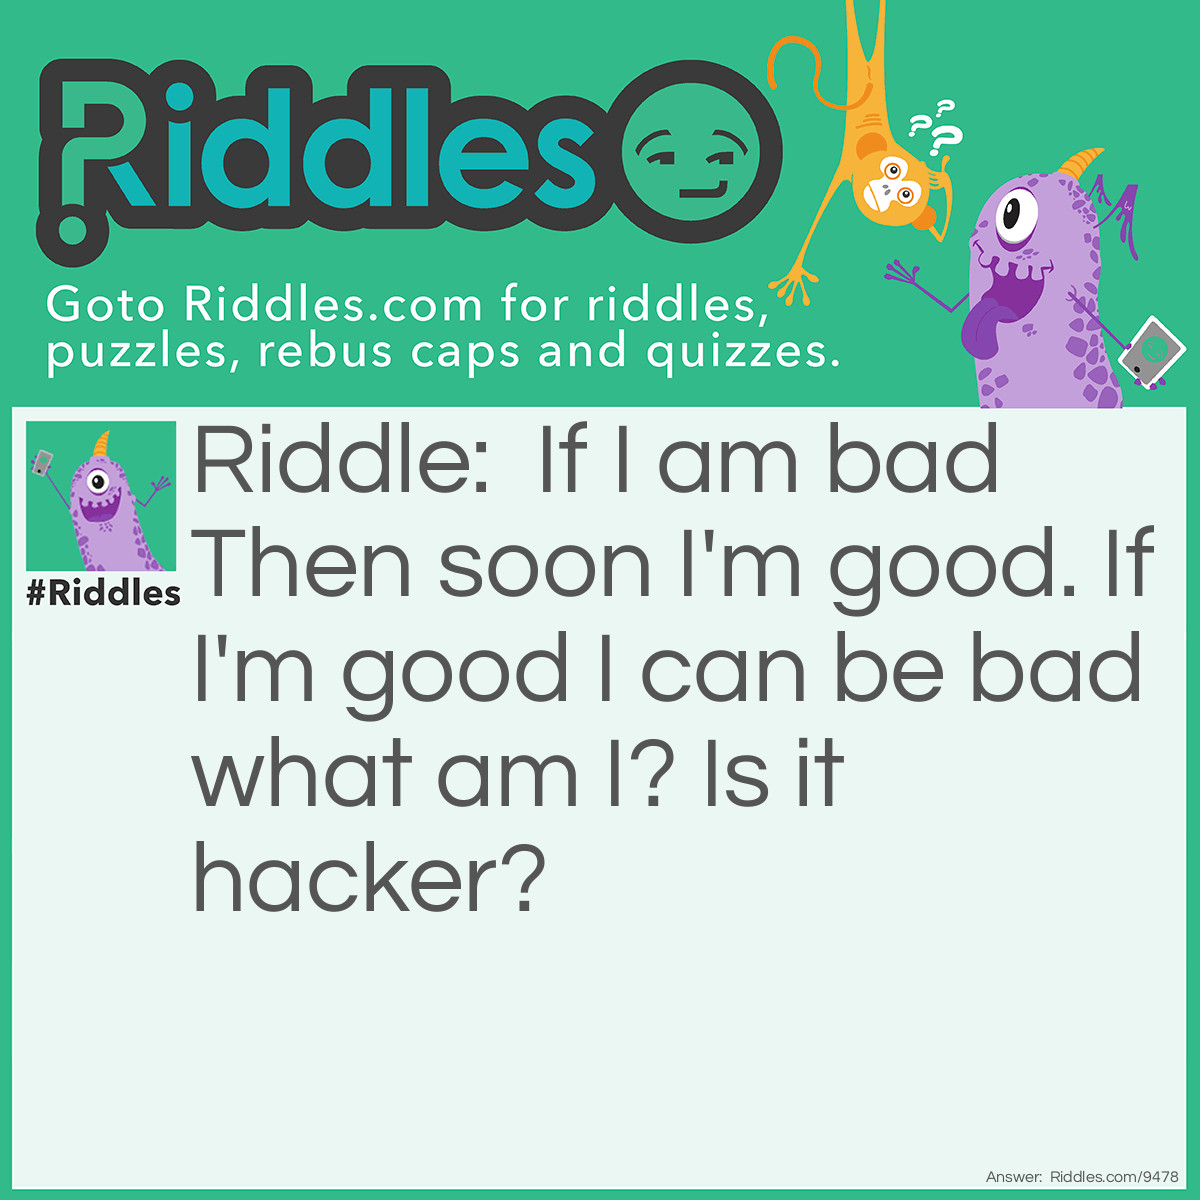 Riddle: If I am bad Then soon I'm good. If I'm good I can be bad what am I? Is it hacker? Answer: The internet connection. Yes In the second part of the question It says I can be bad A hacker might be their or you might lose connection.